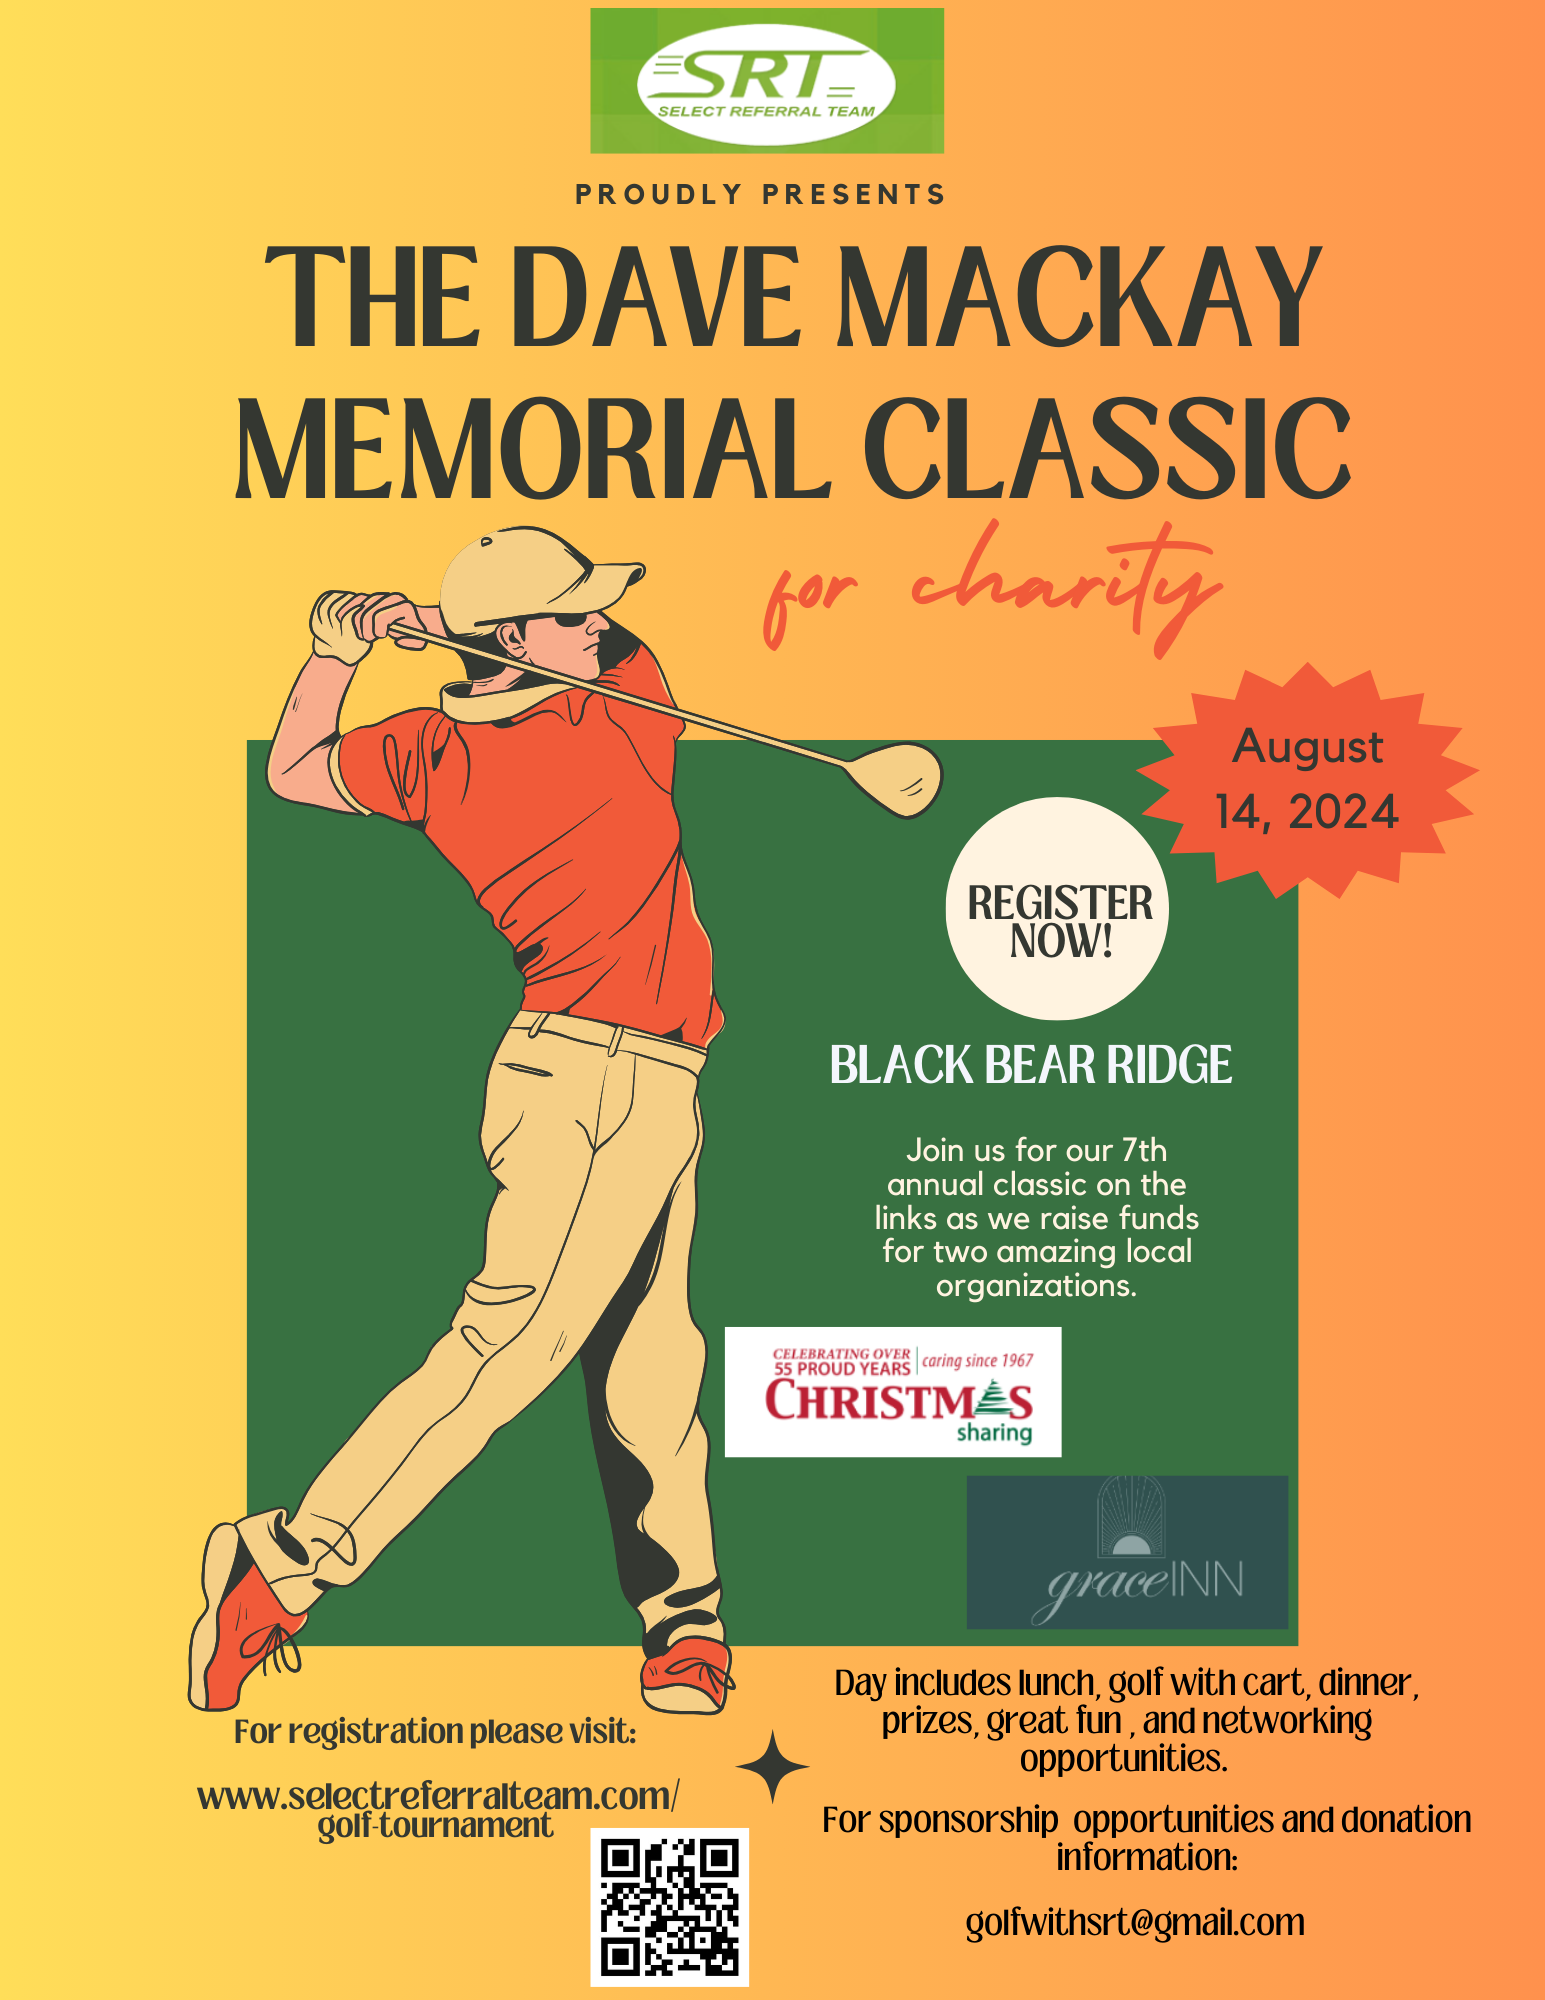 Poster for golf tournament with graphic of golfer swinging a driver with event details listed as well.